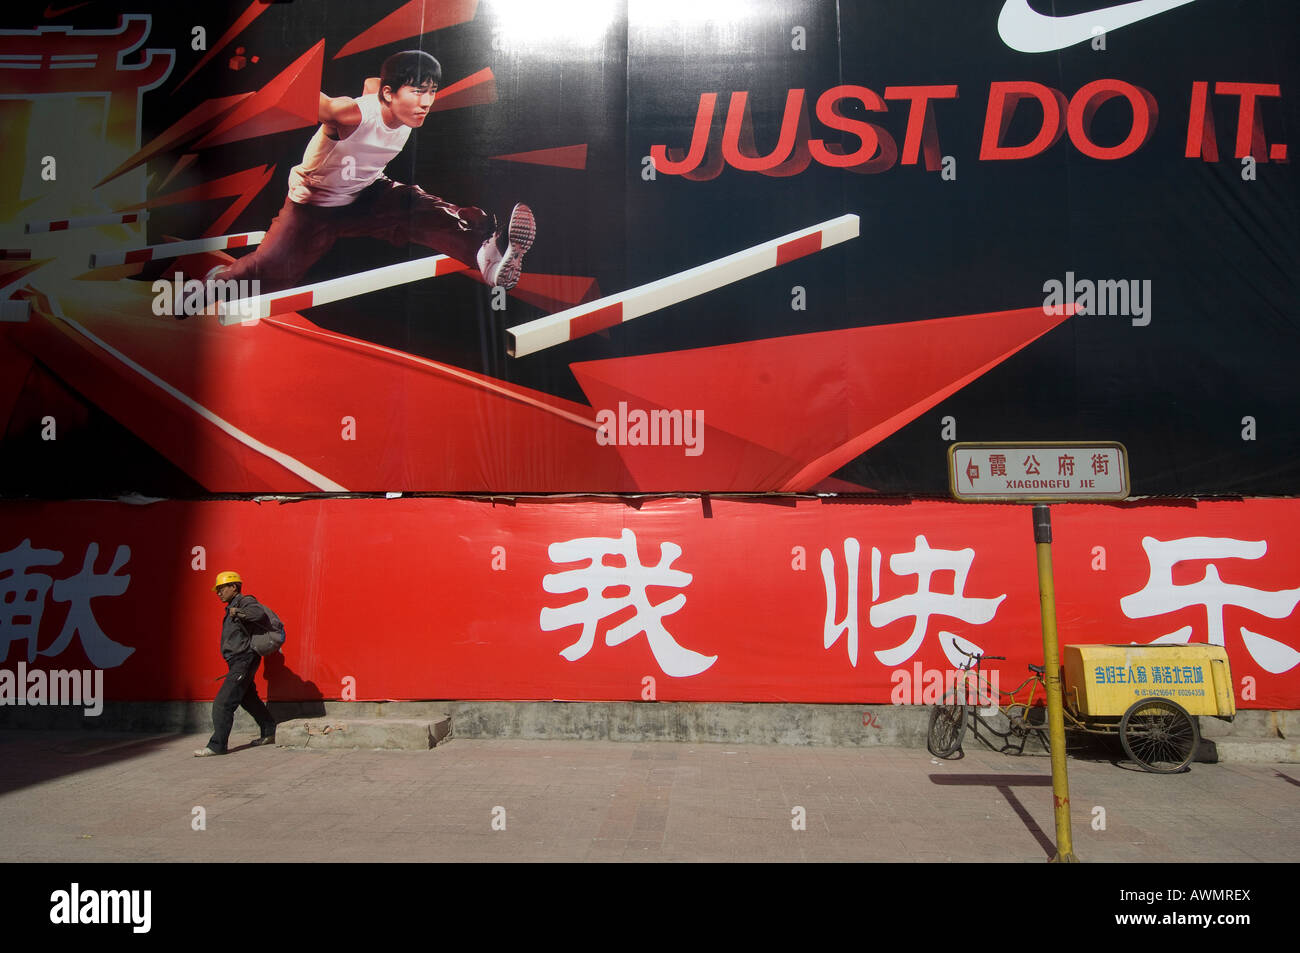 China's star hurdler Liu Xiang appears on an advertising billboard in the Wanfushing shopping district of central Beijing Stock Photo